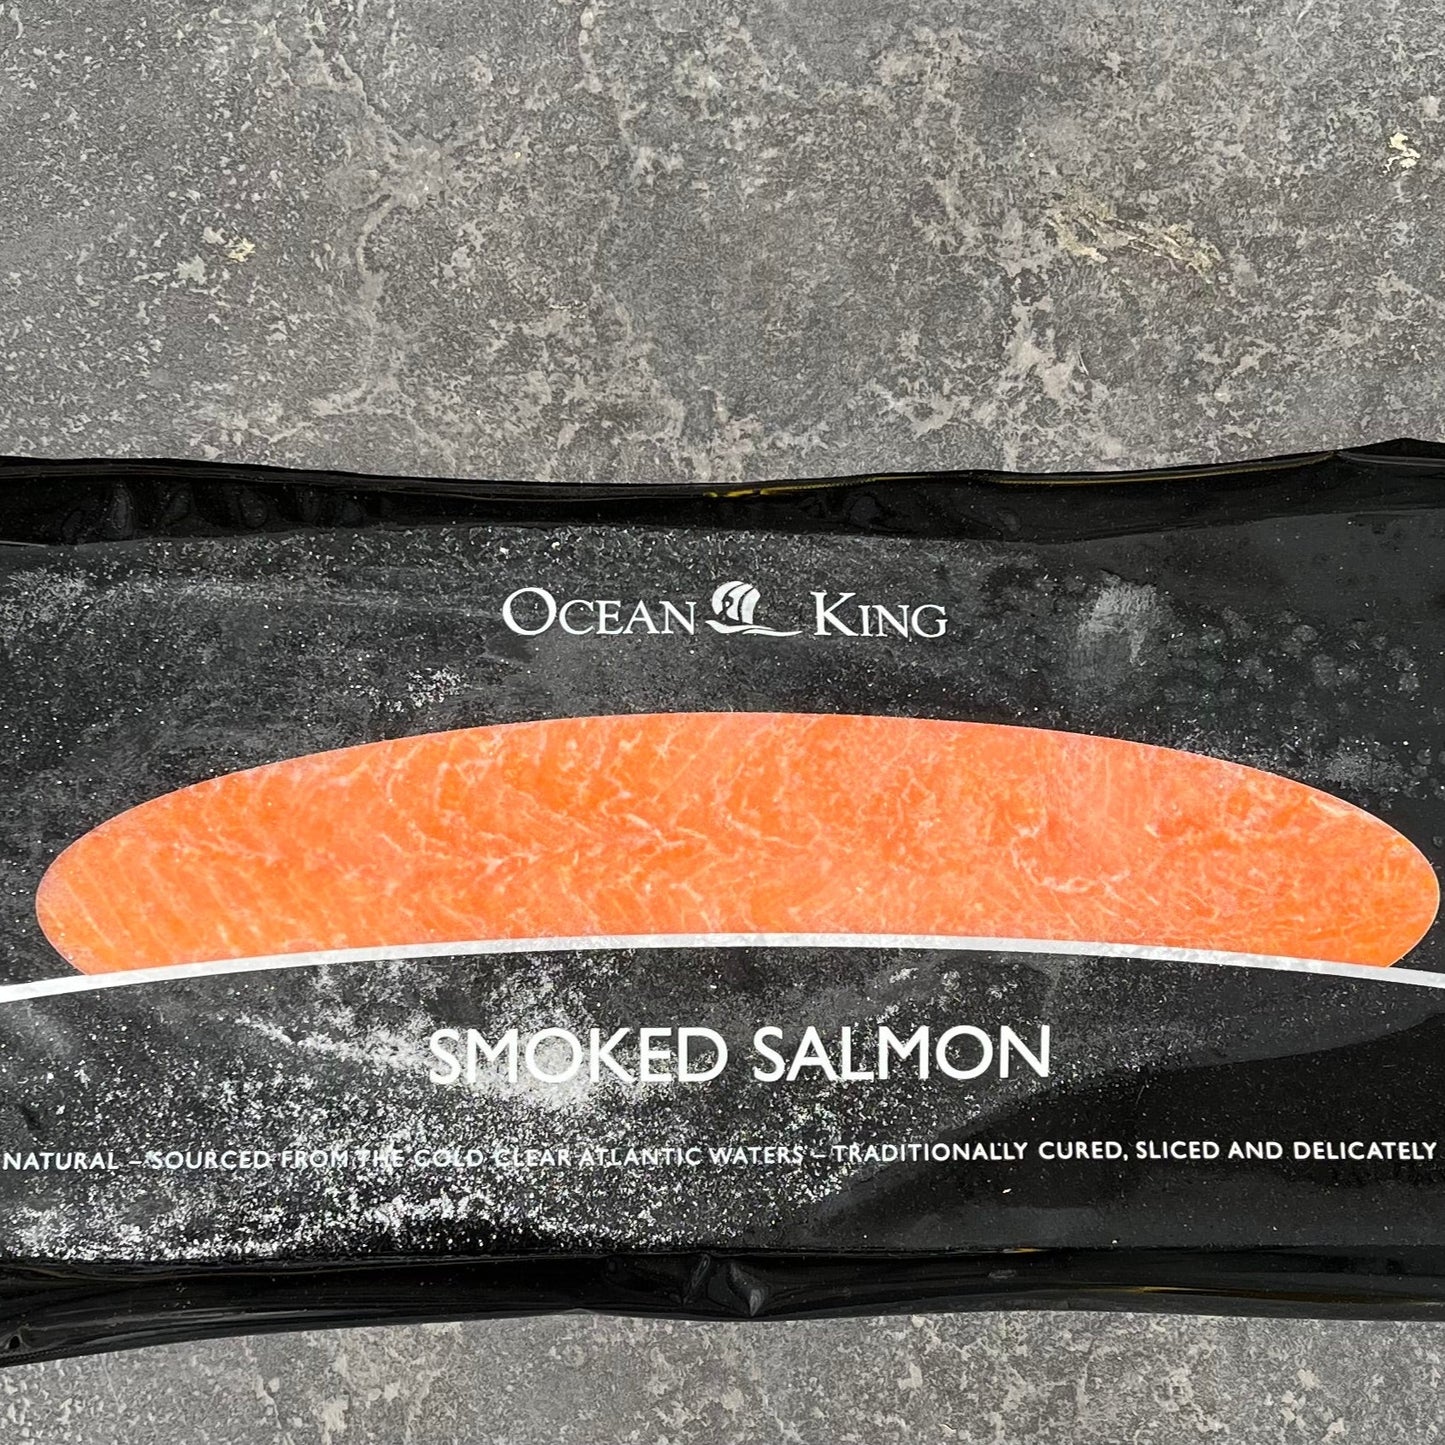 Ocean King Cured and Sliced Smoked Salmon